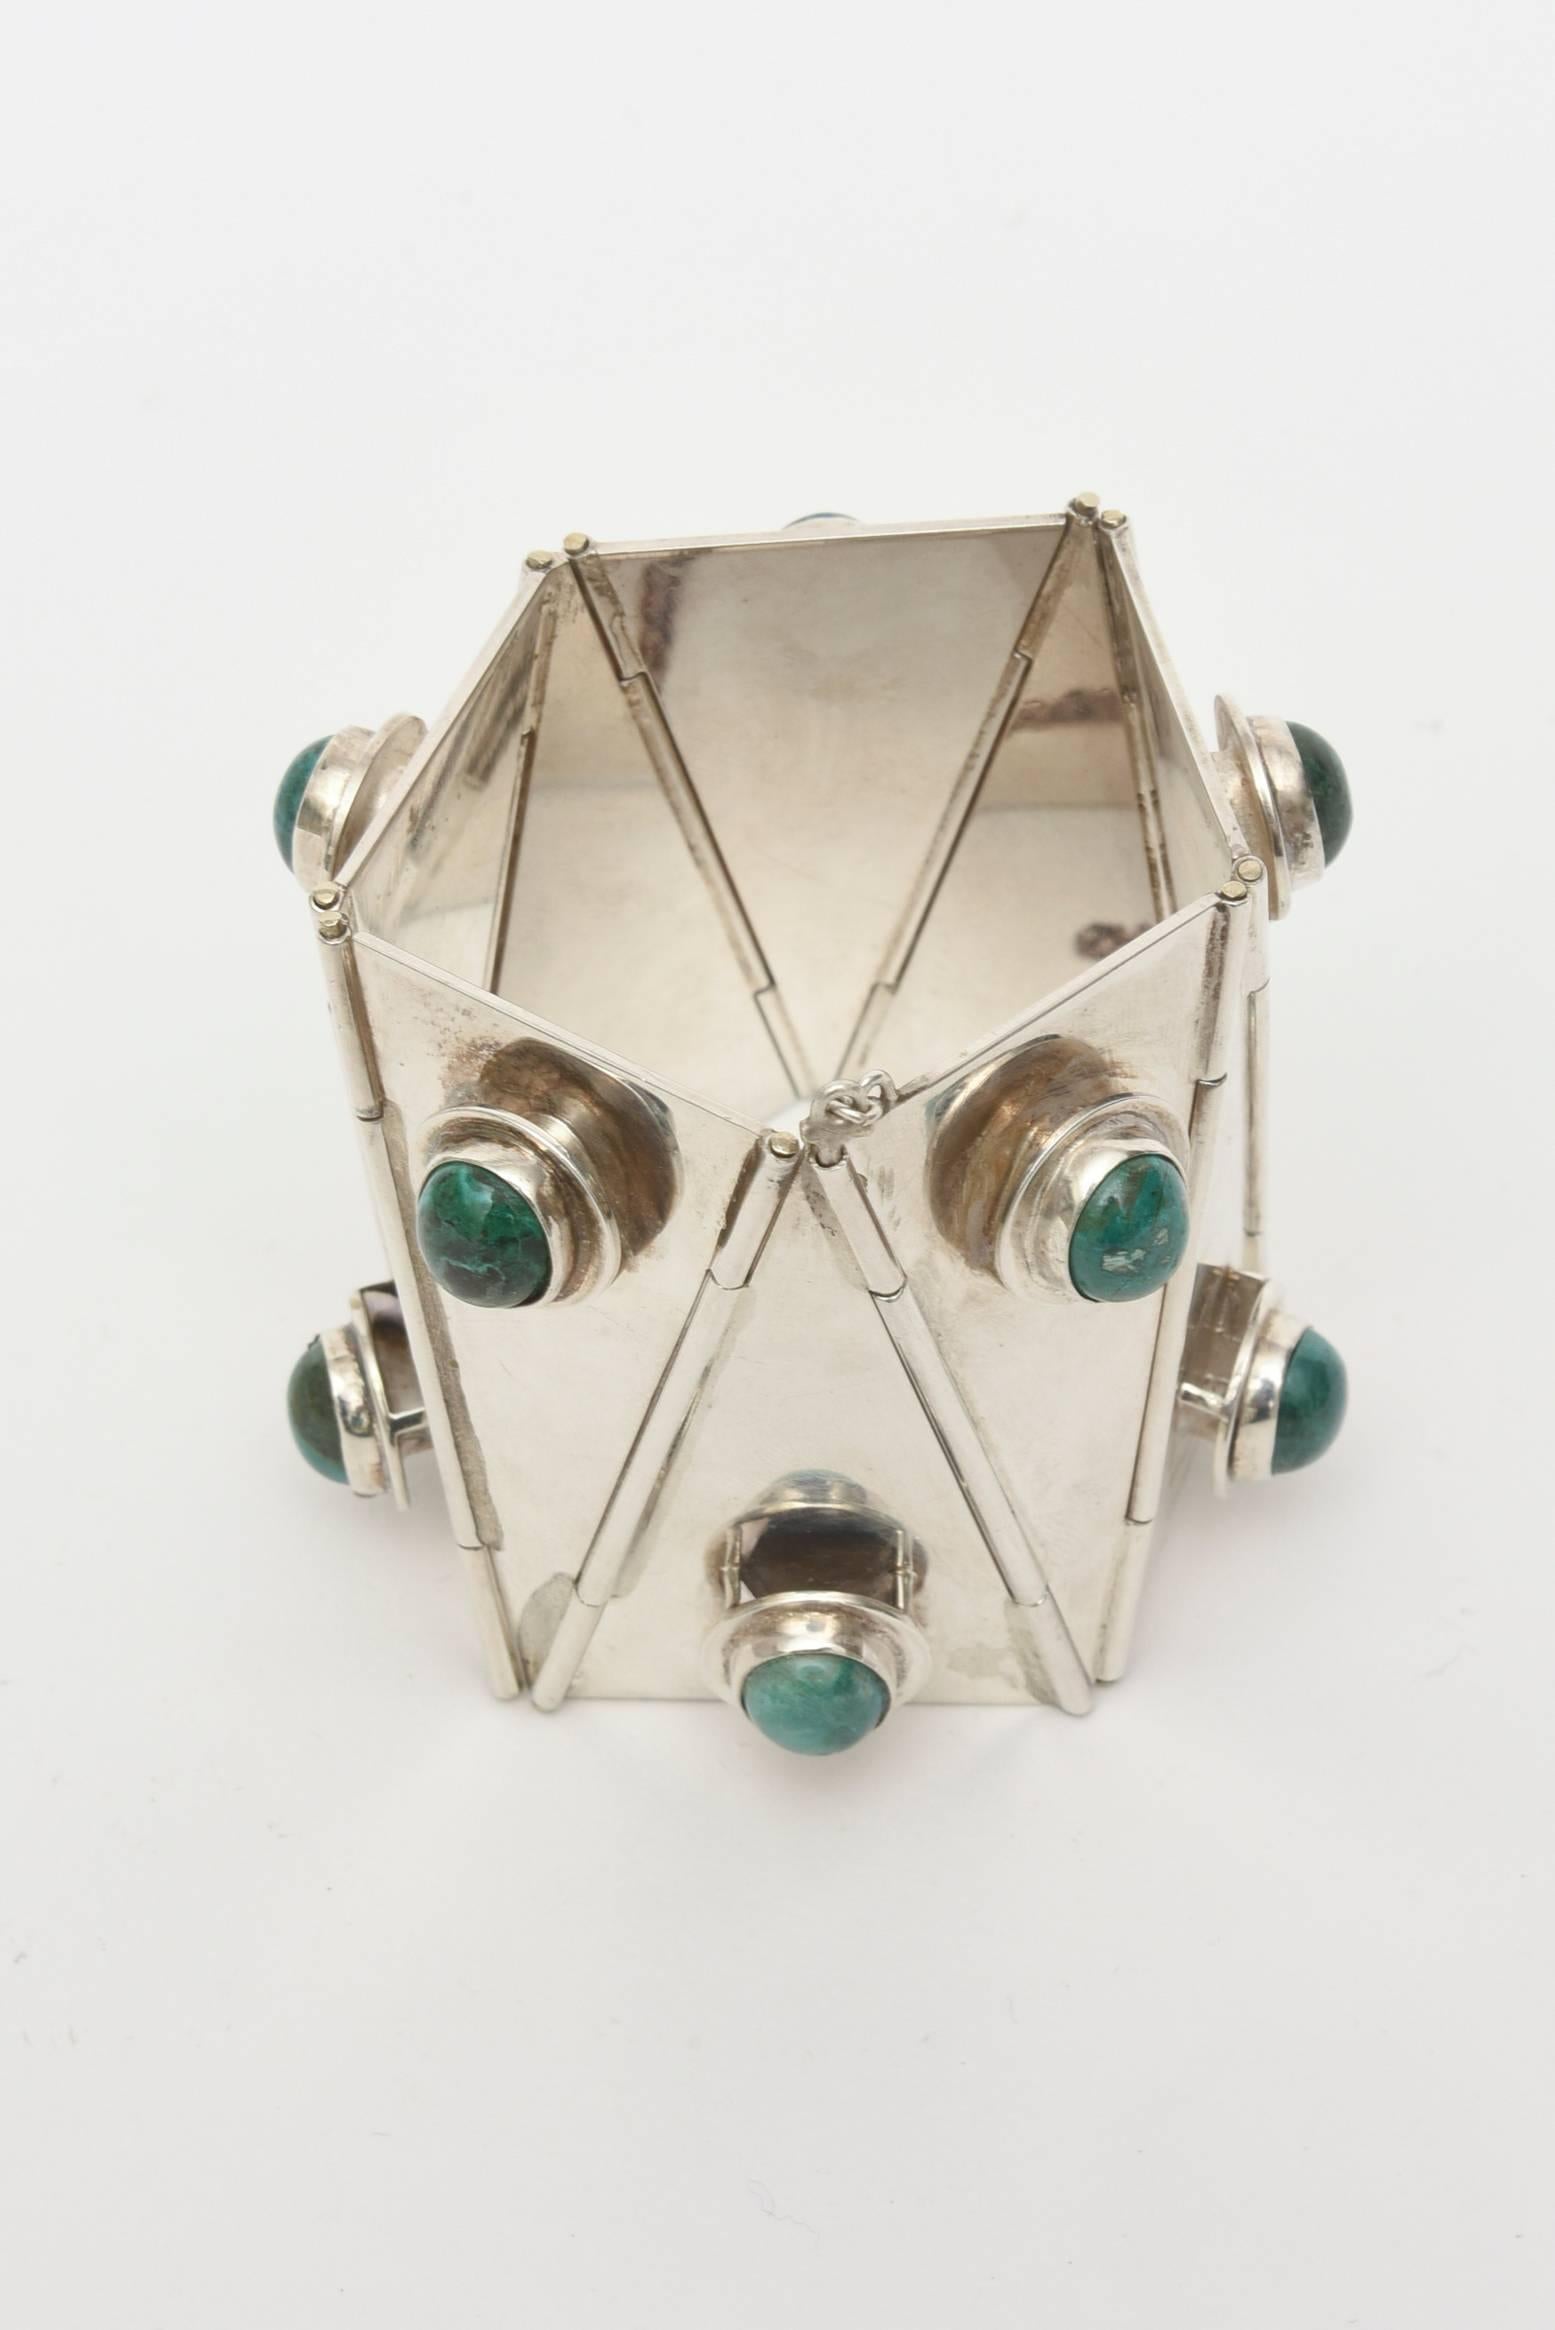 This amazing and spectacular studio made one of a kind cuff bracelet of Sterling Silver & Malachite, is a 